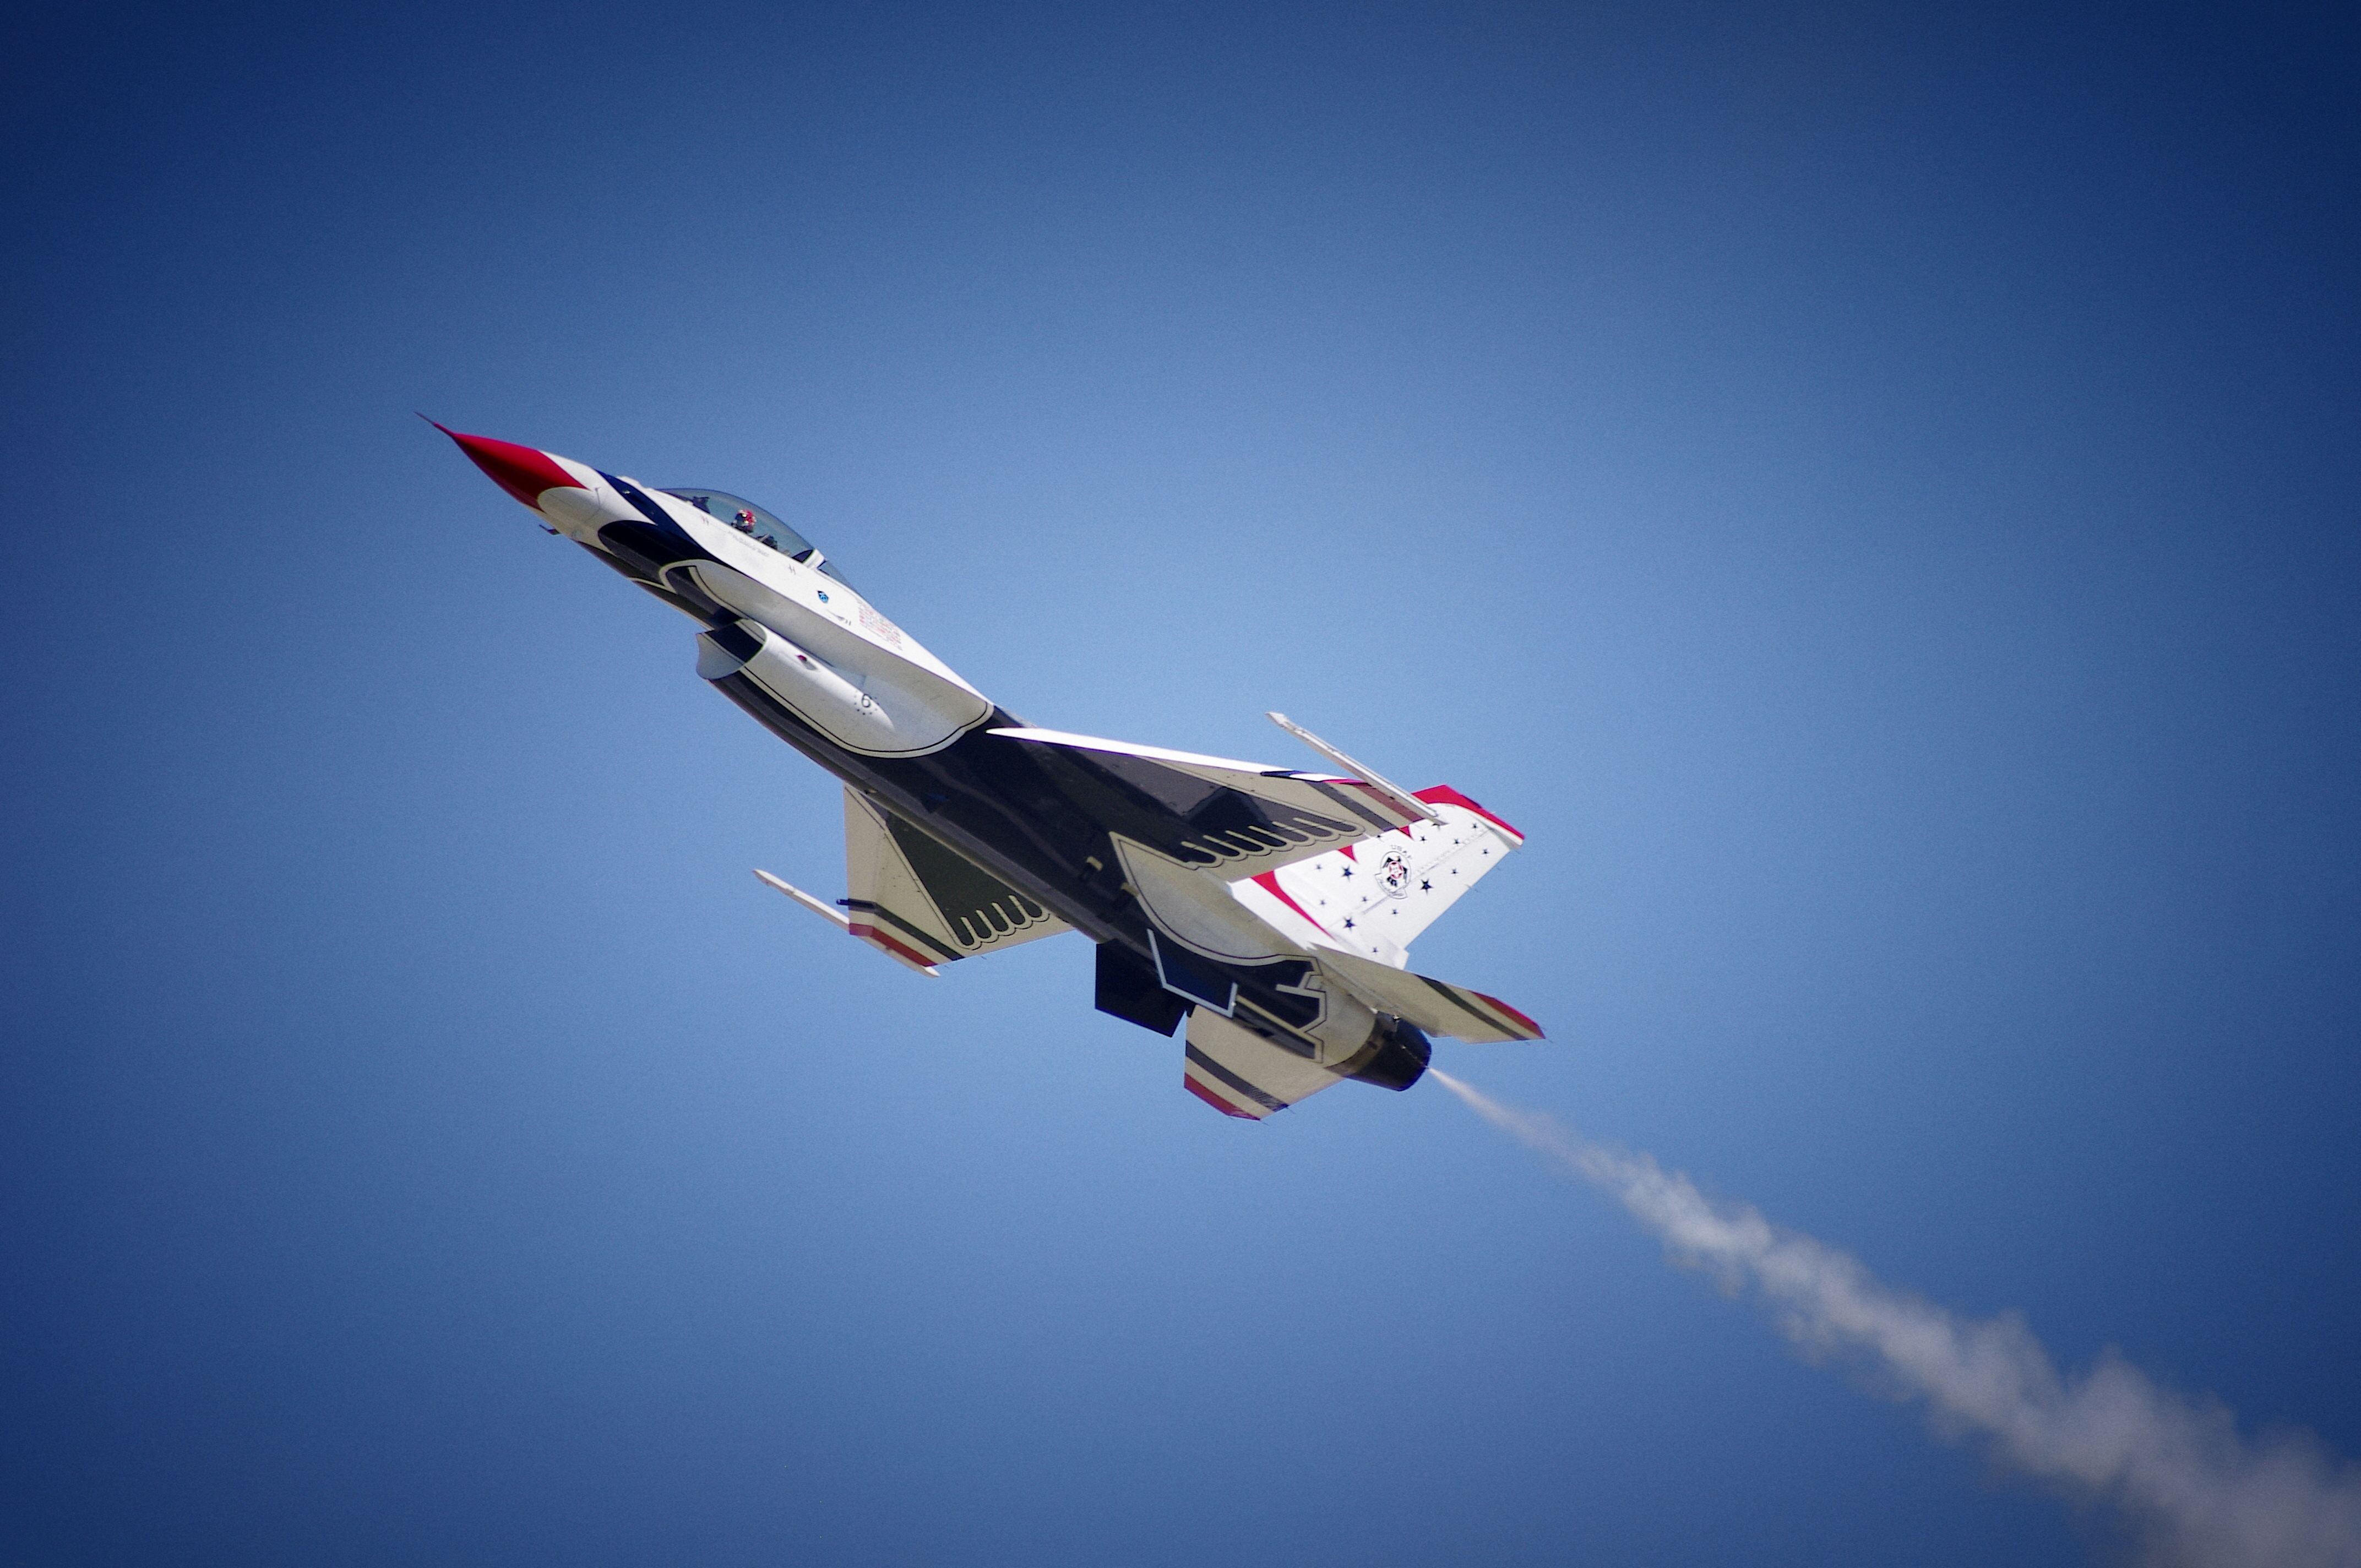 Airshow Pictures Rejected - Contributor Experience - Shutterstock ...